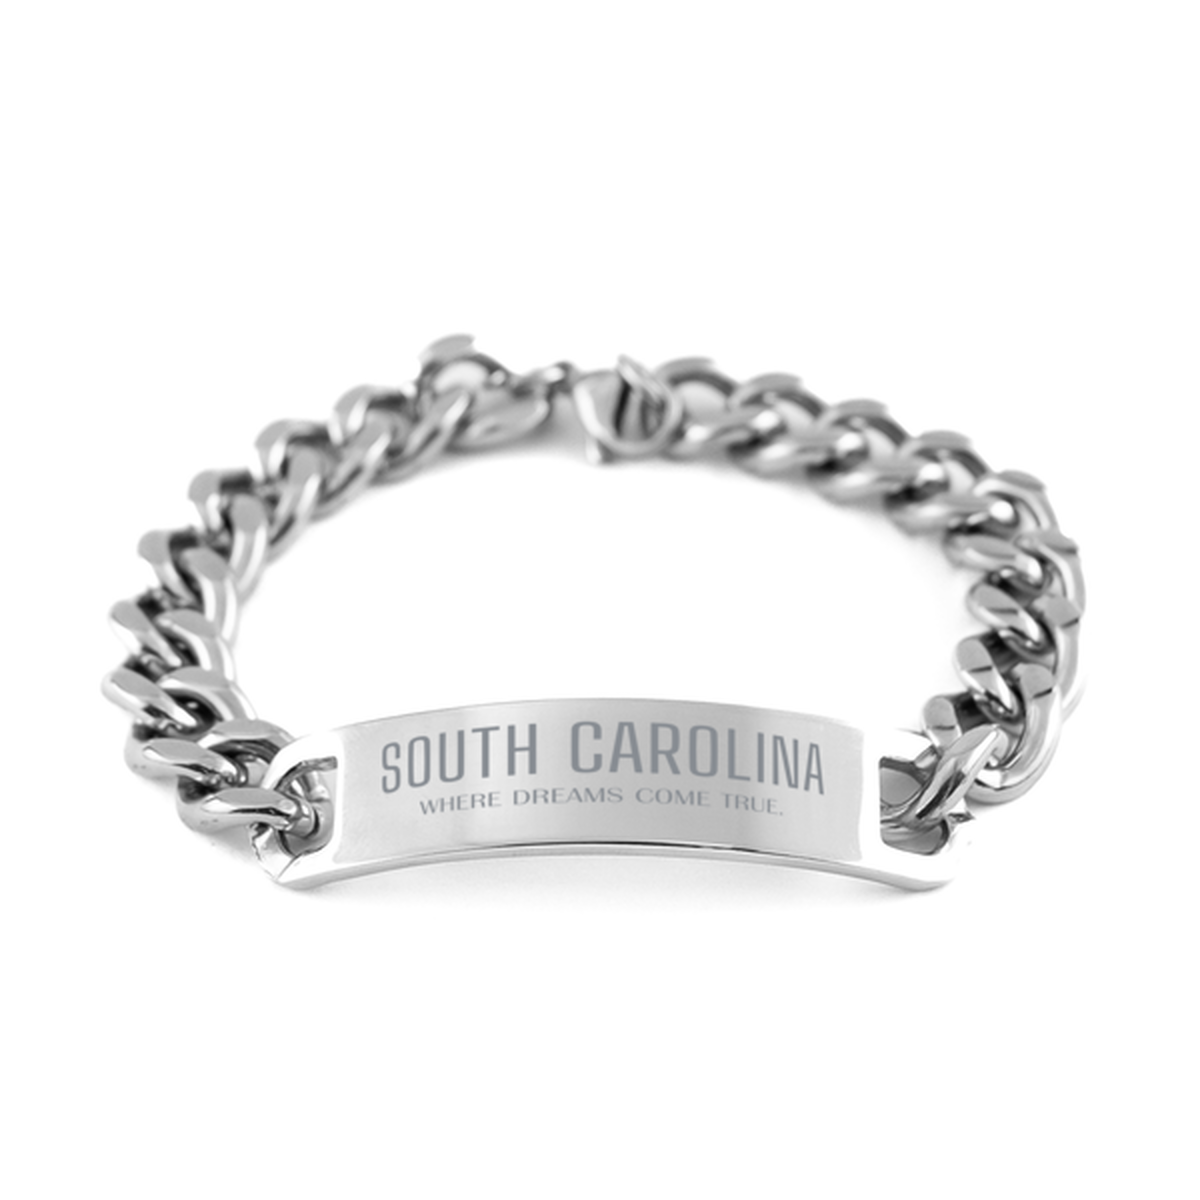 Love South Carolina State Cuban Chain Stainless Steel Bracelet, South Carolina Where dreams come true, Birthday Inspirational Gifts For South Carolina Men, Women, Friends